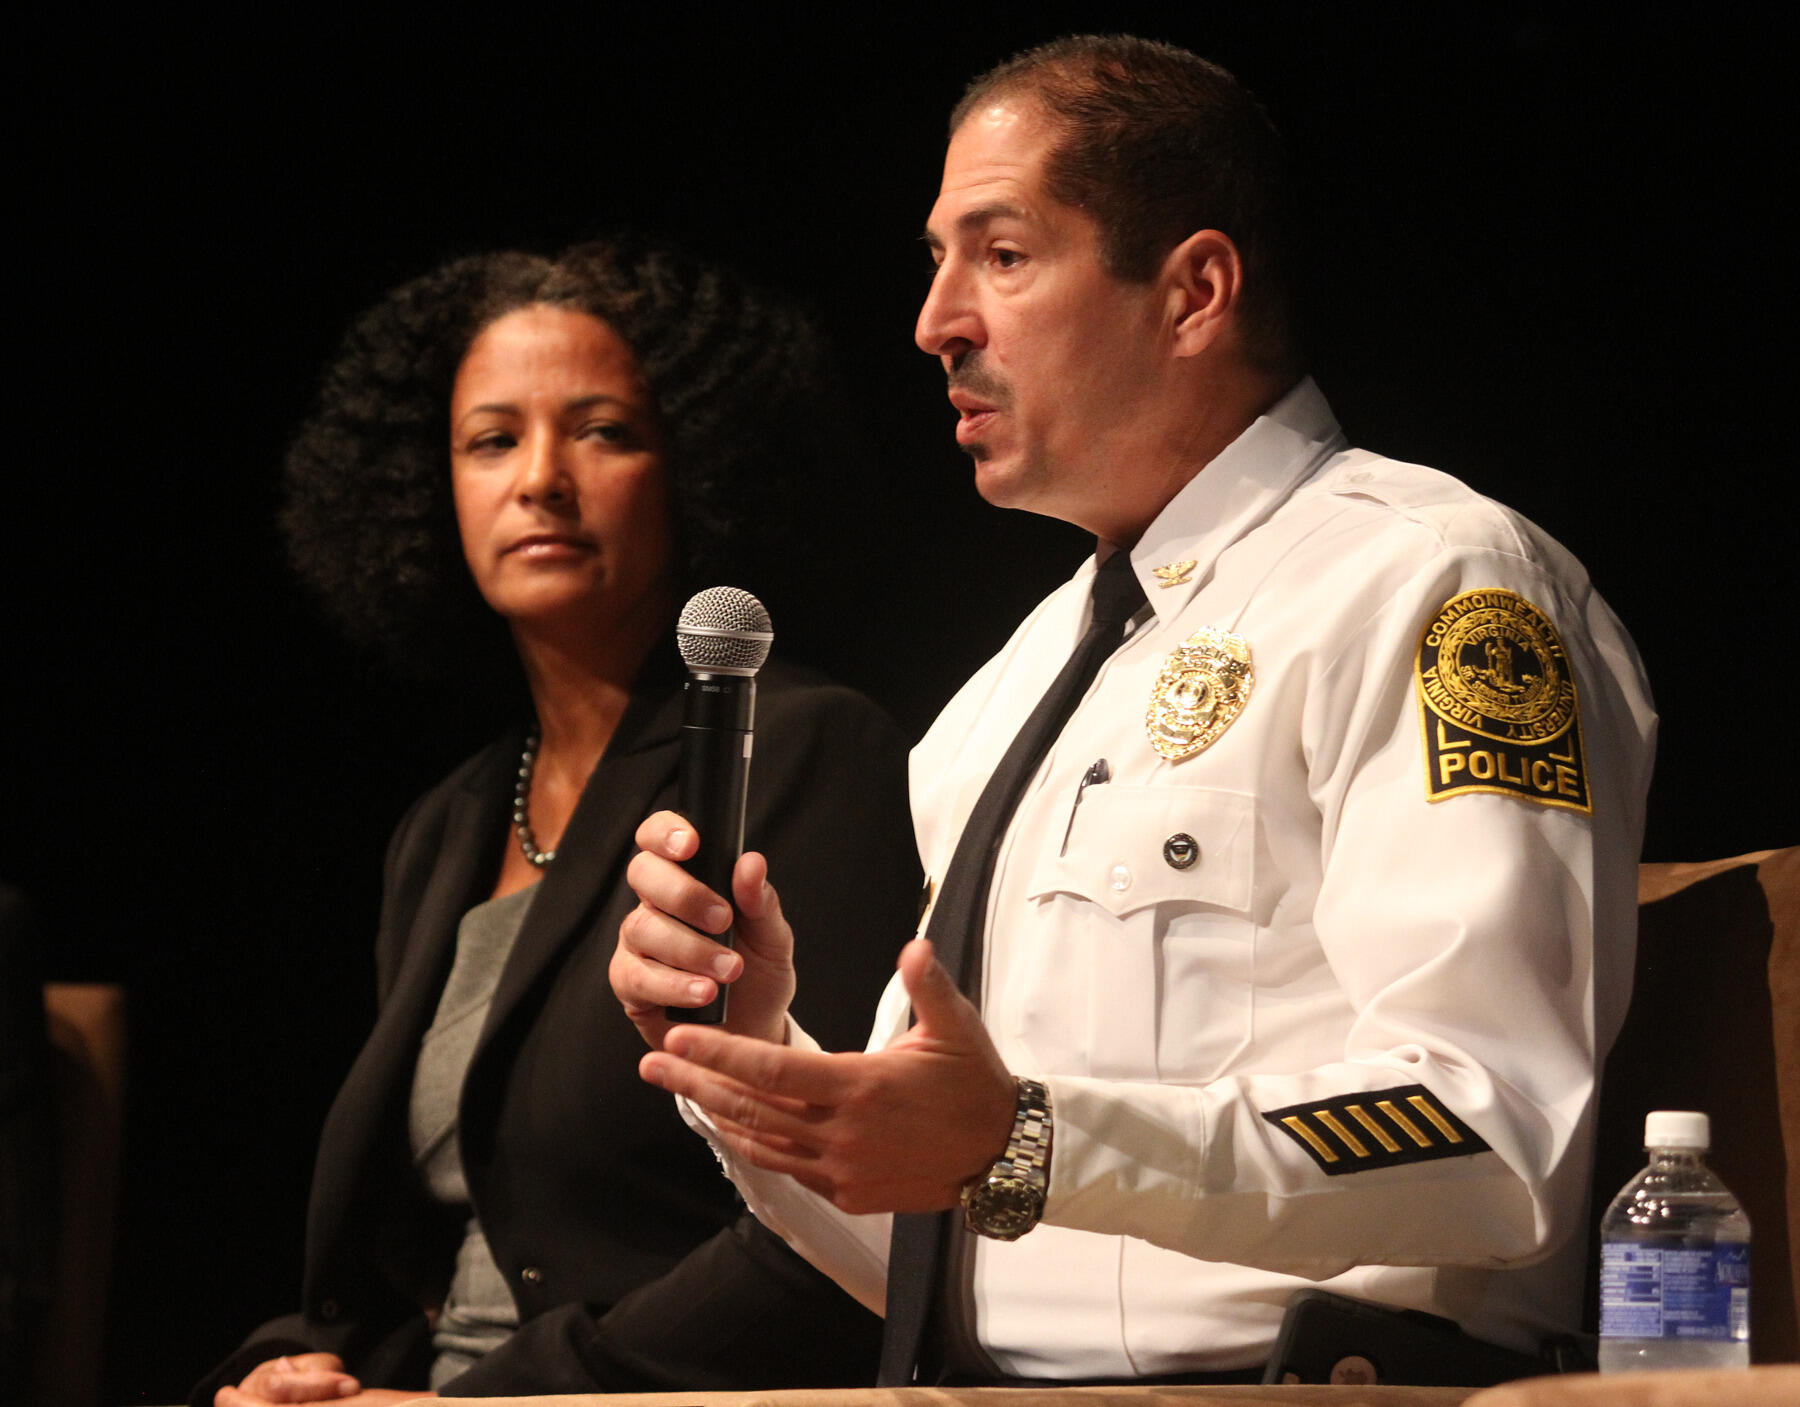 Chief John Venuti, Virginia Commonwealth University Police, speaks during the "Race and the Criminal Justice System in America" panel, part of the Wilder Symposium on Race and American Society. The event was held Friday at VCU's Grace Street Theatre.